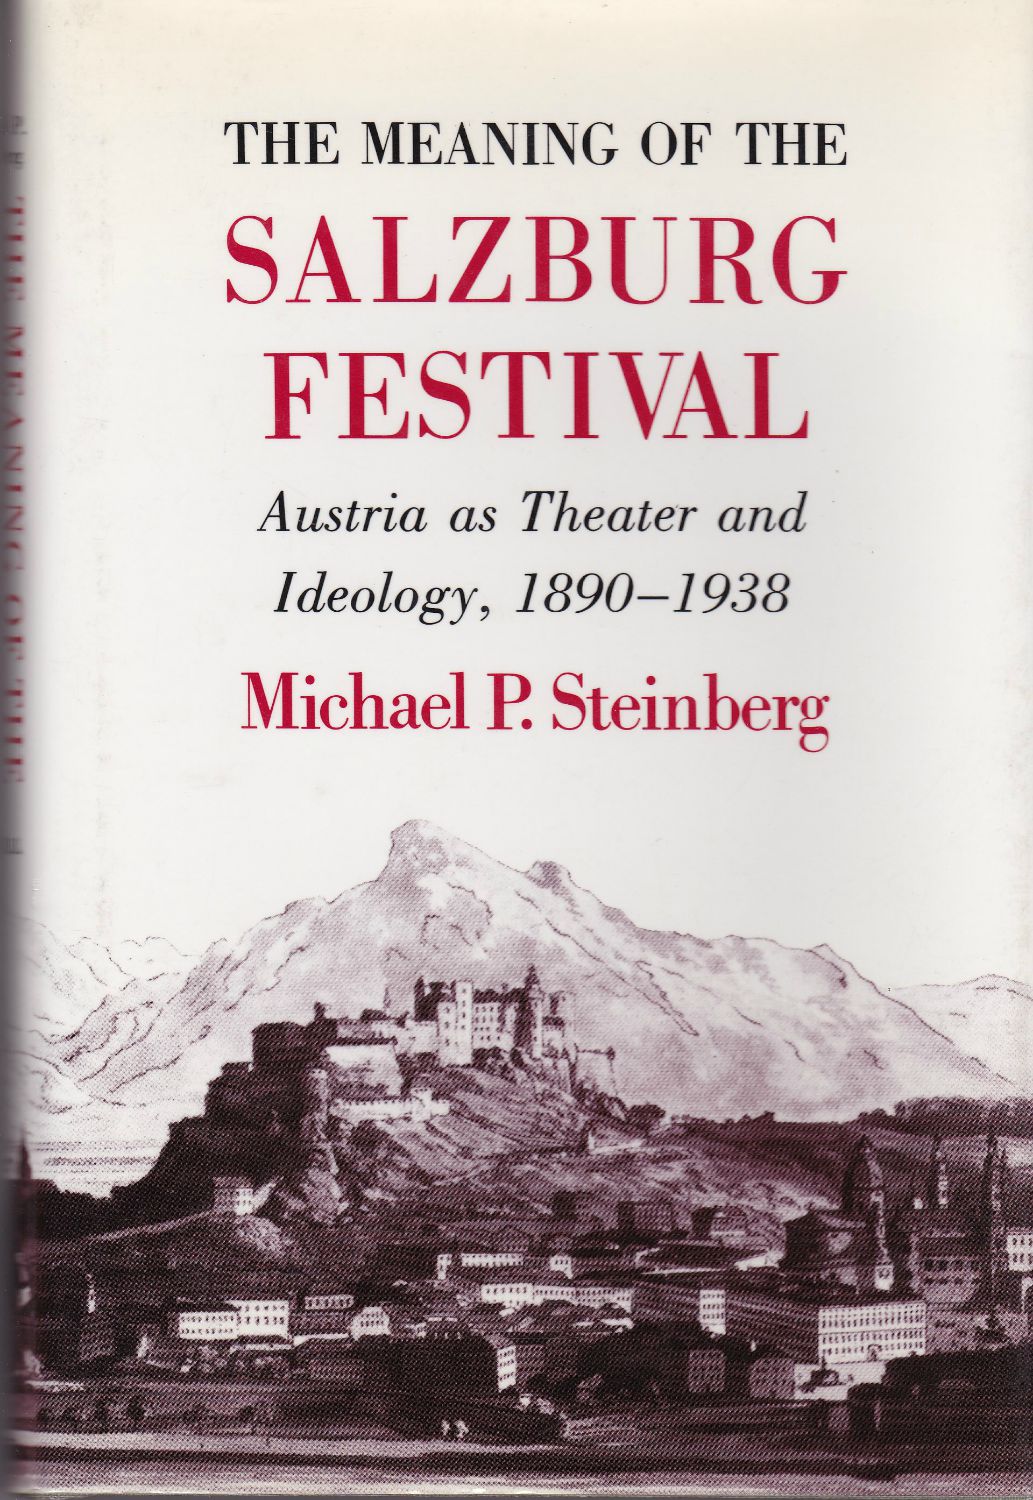 The meaning of the Salzburg Festival : Austria as theater and ideology, 1890-1938